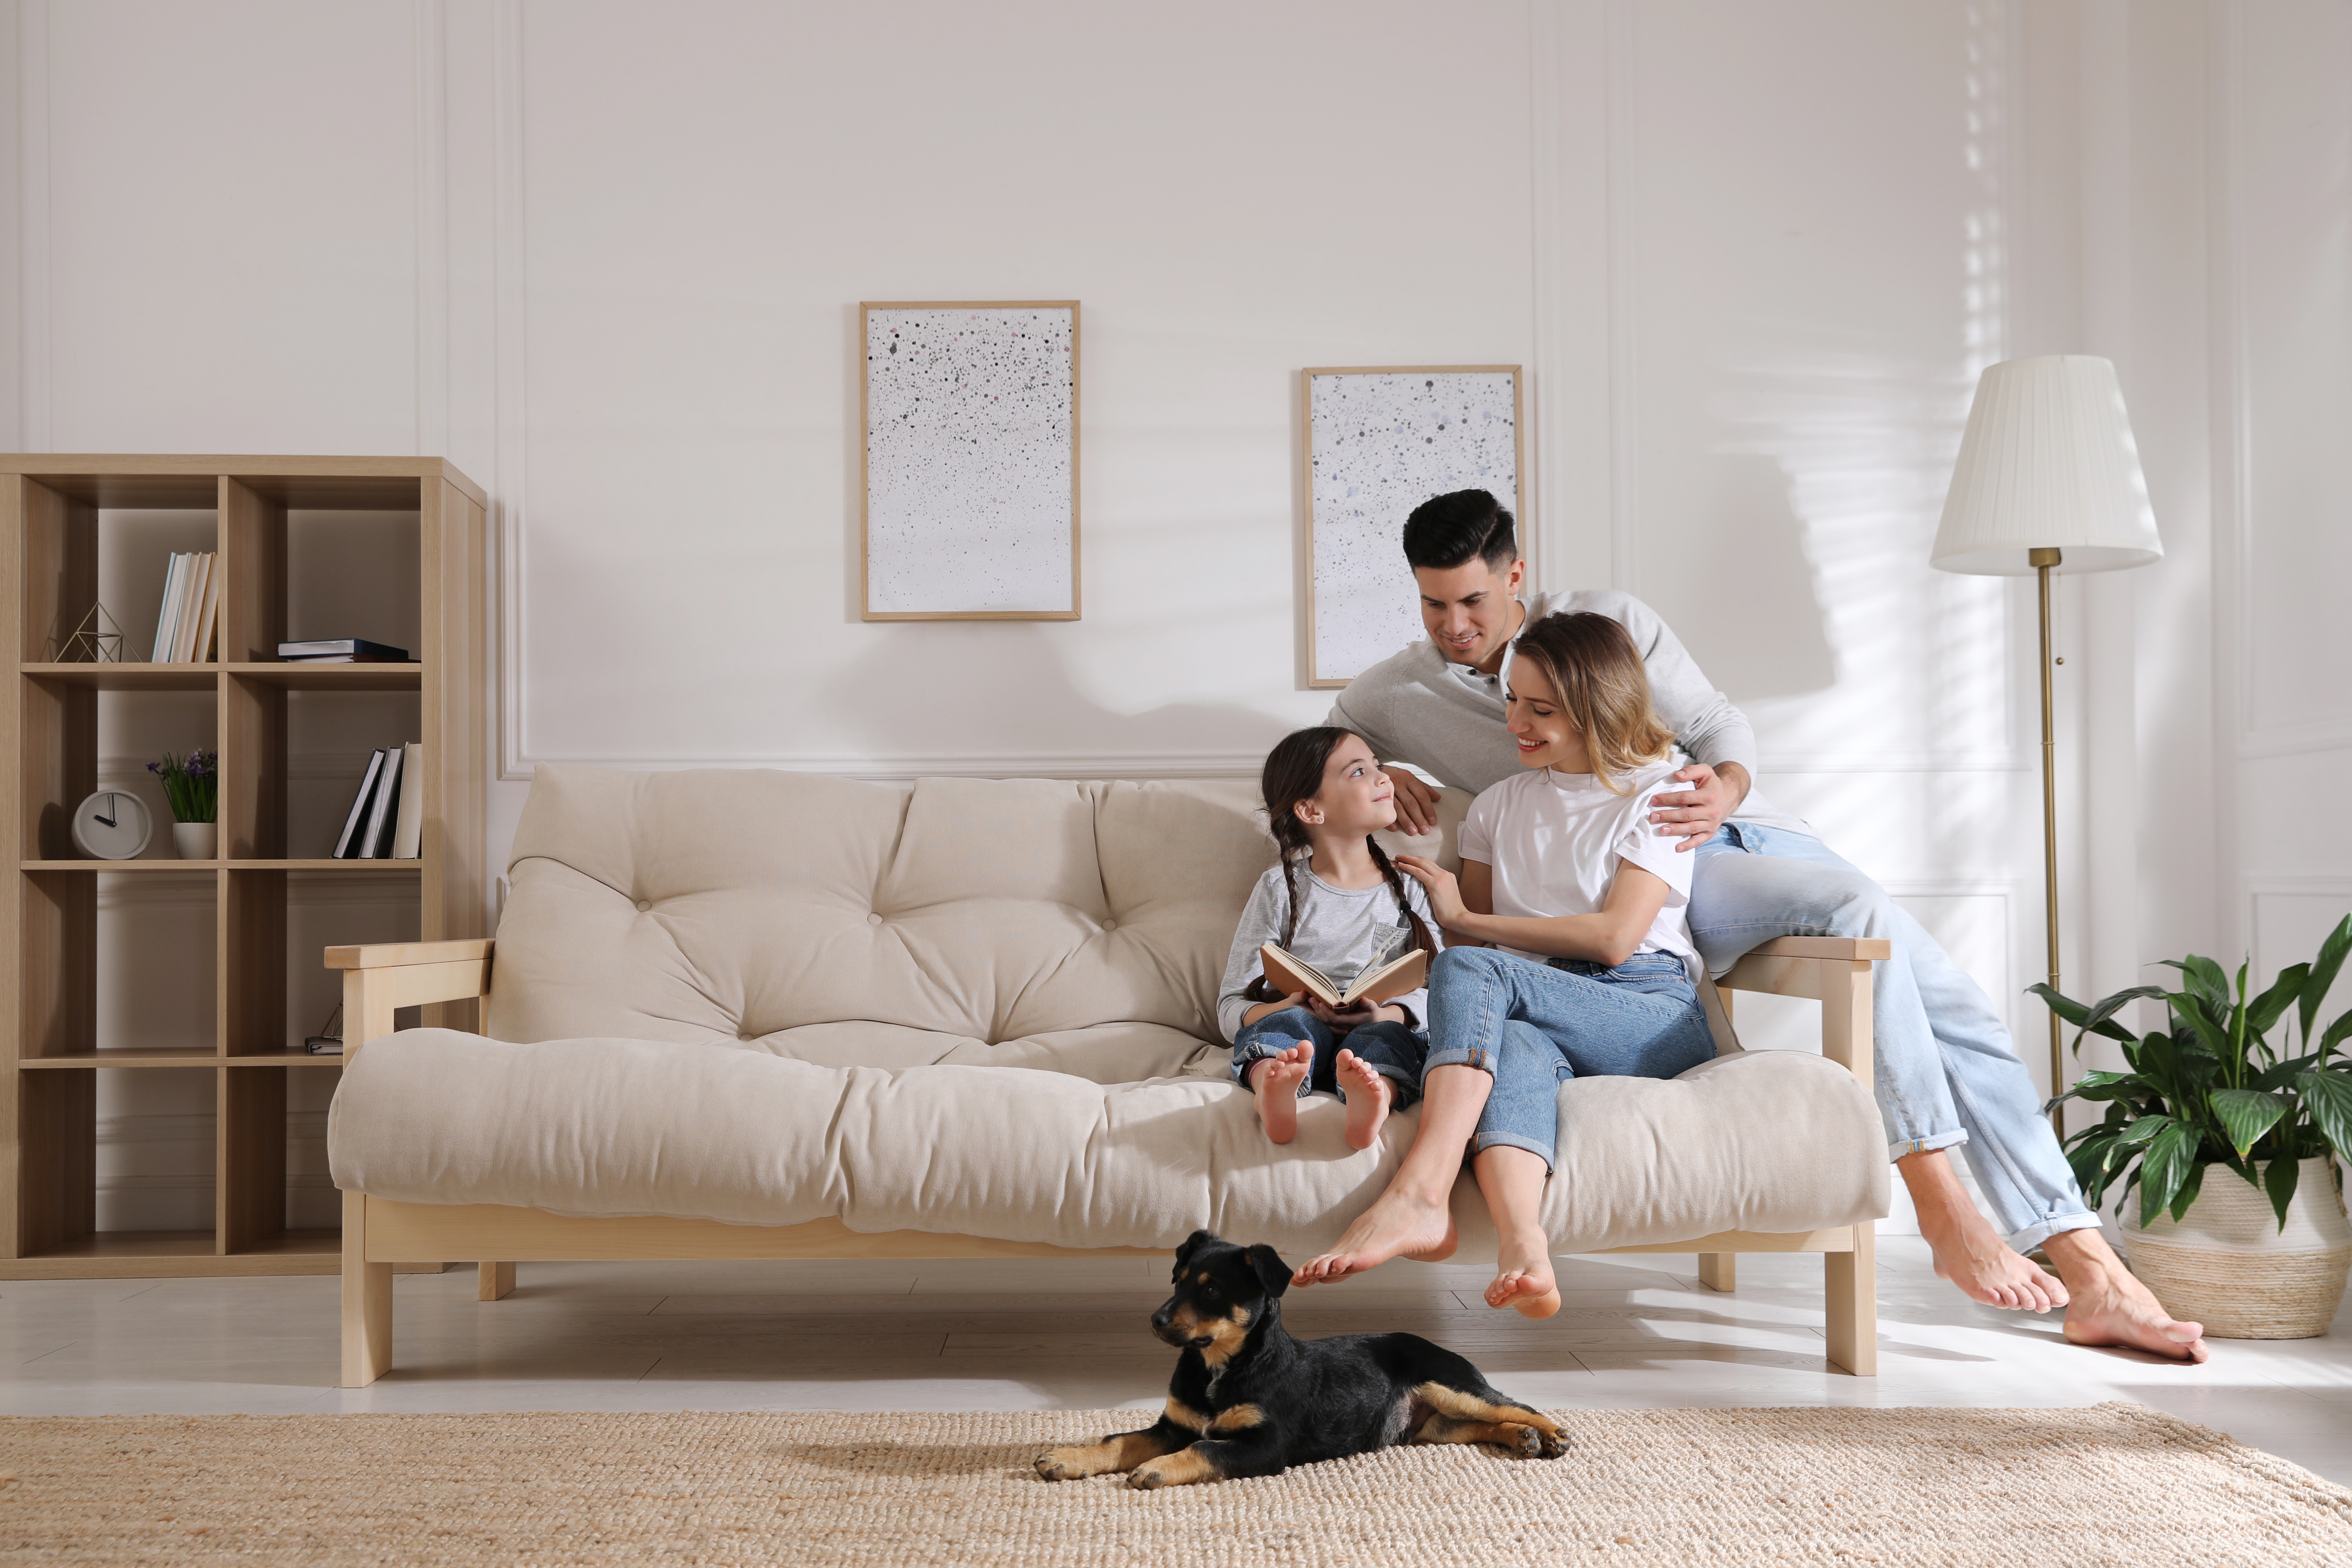 A family and their pet dog | Source: Shutterstock